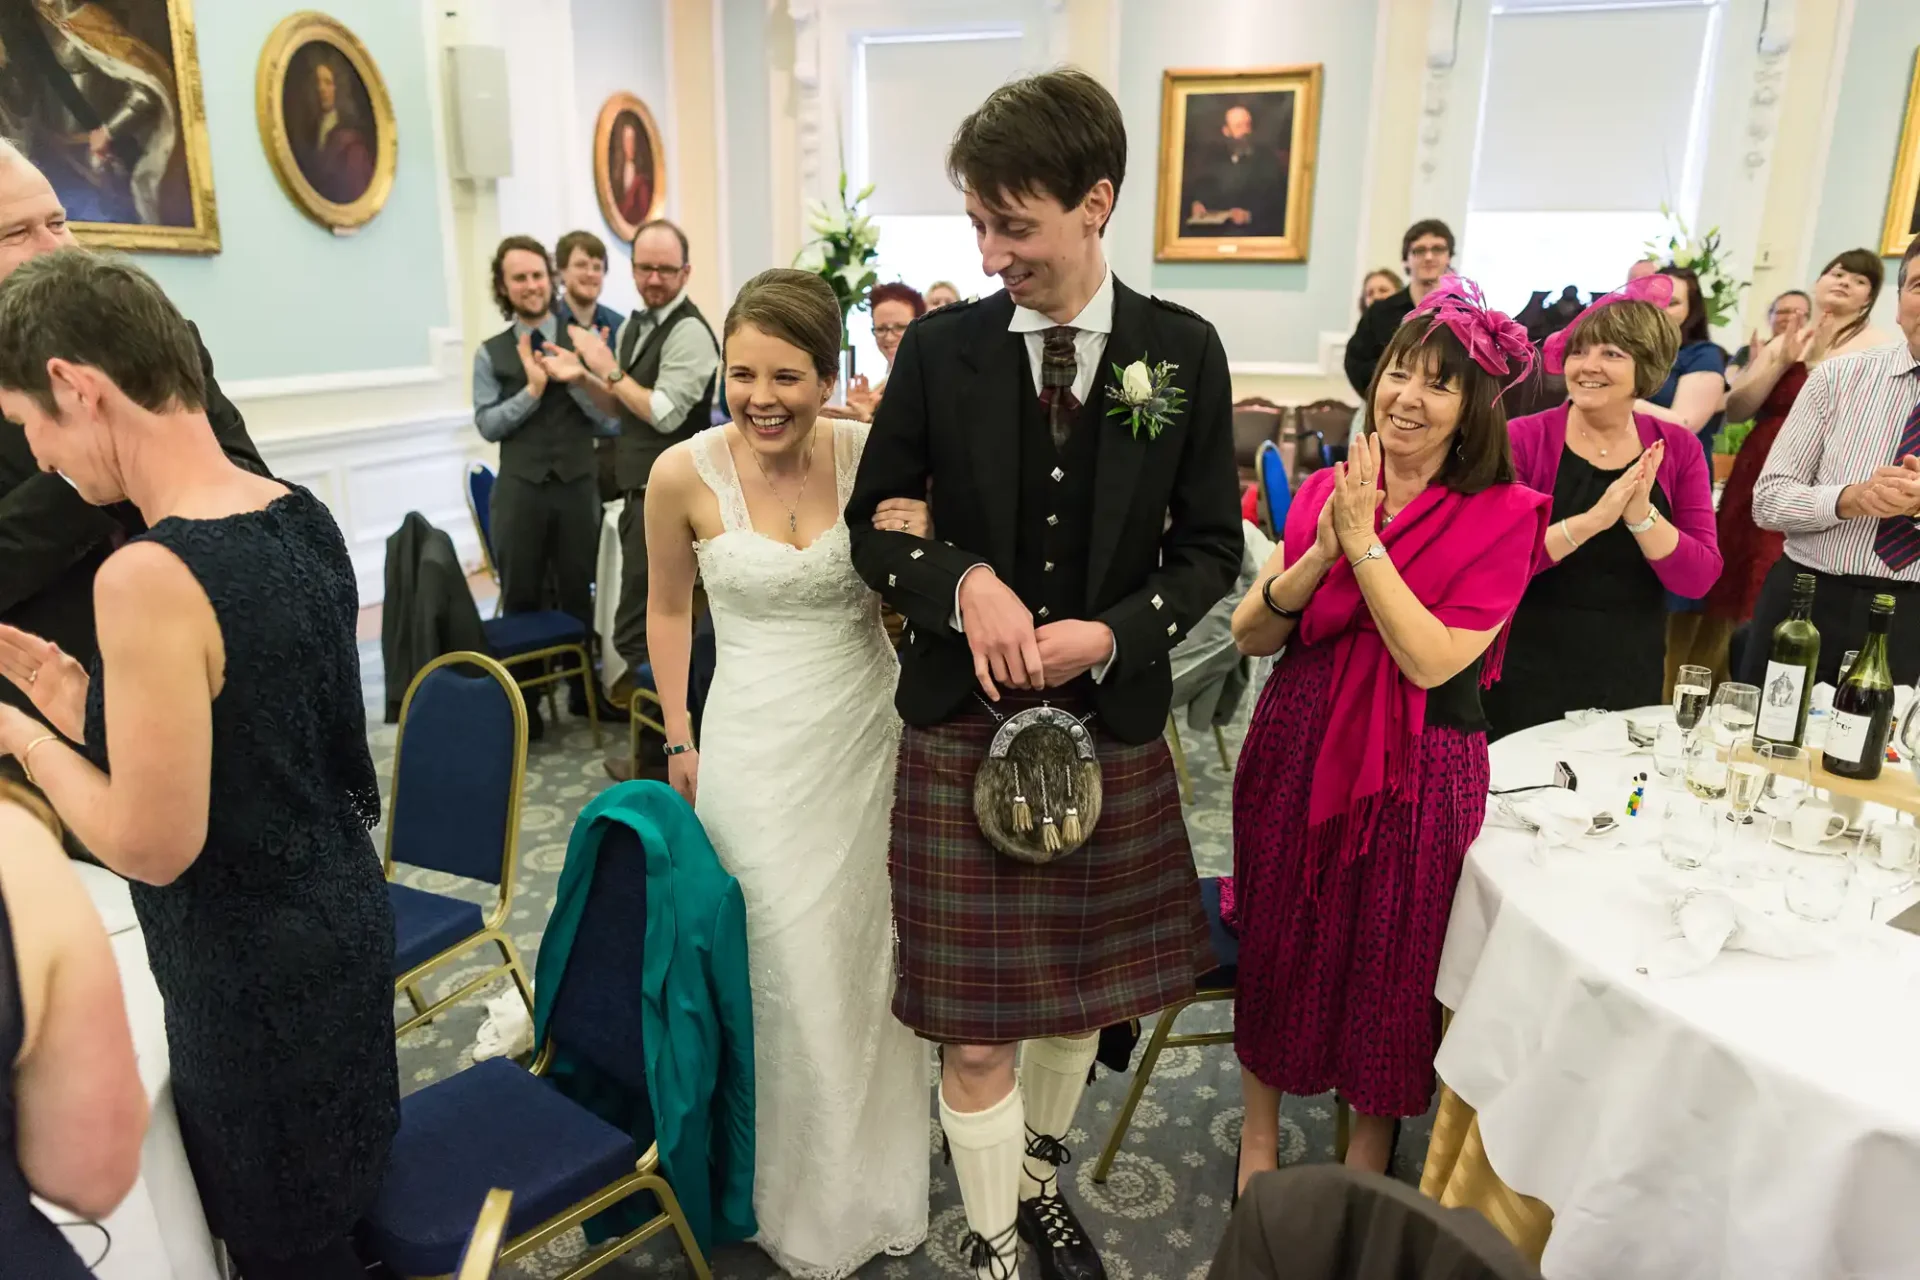 A bride and groom, the groom in a kilt, walking through applauding guests at their wedding reception.